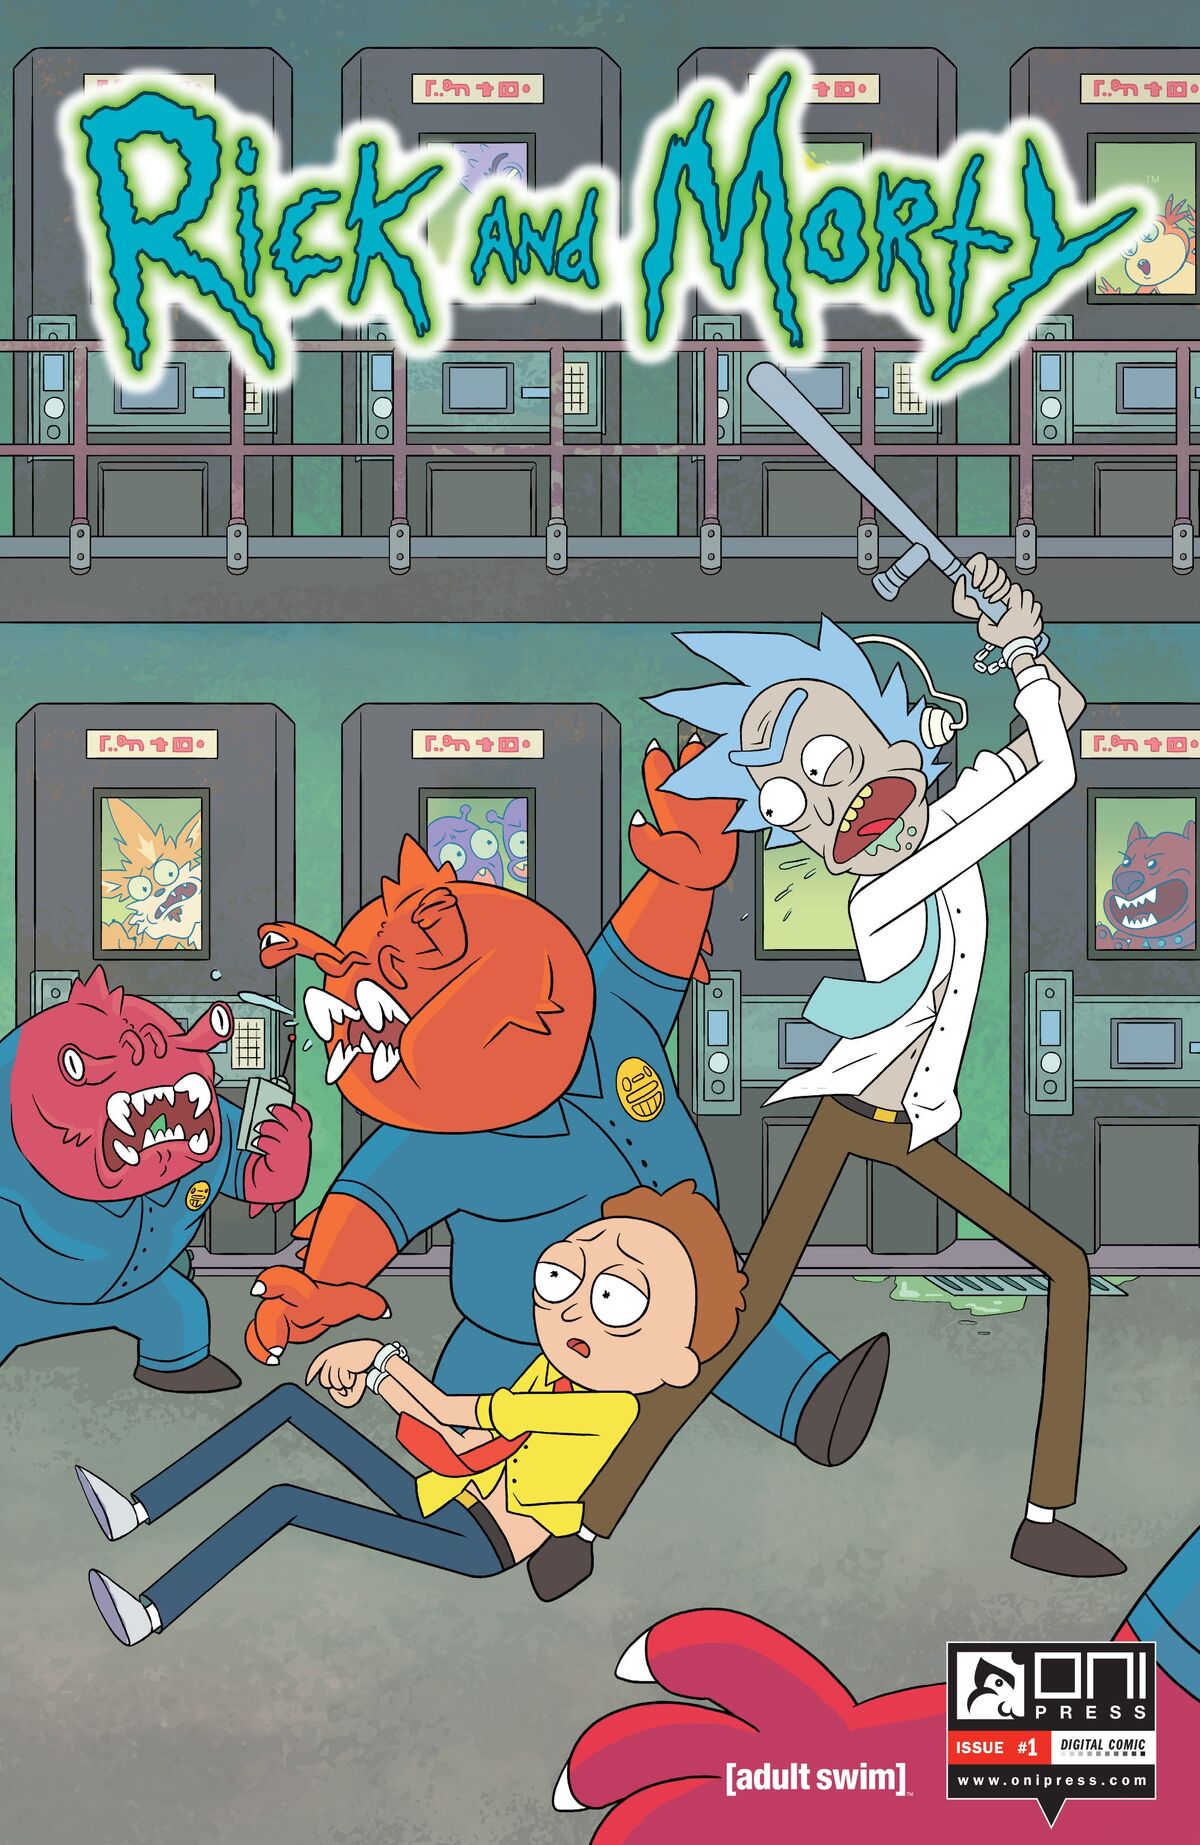  POSTER STOP ONLINE Rick and Morty - TV Show Poster/Print (UFO -  I Want to Believe) (Size 24 x 36) : Office Products